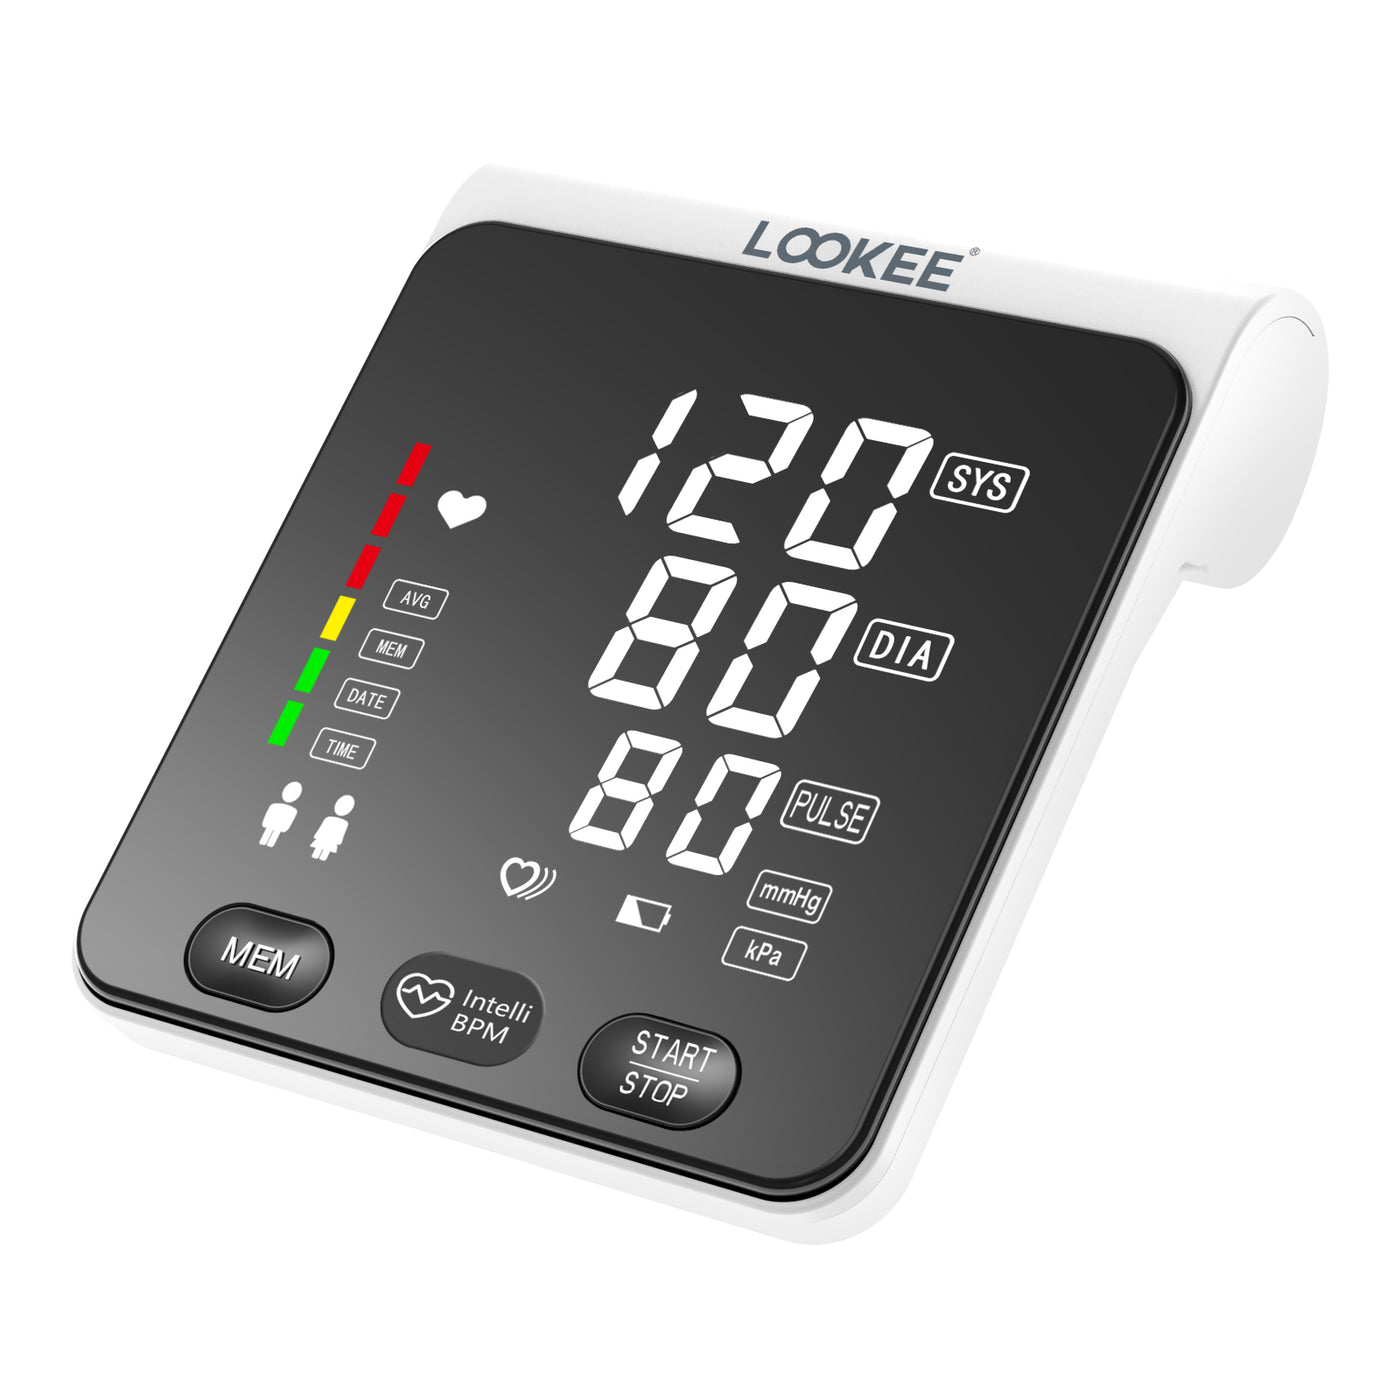 High Quality Blood Pressure Monitor for Upper Arm